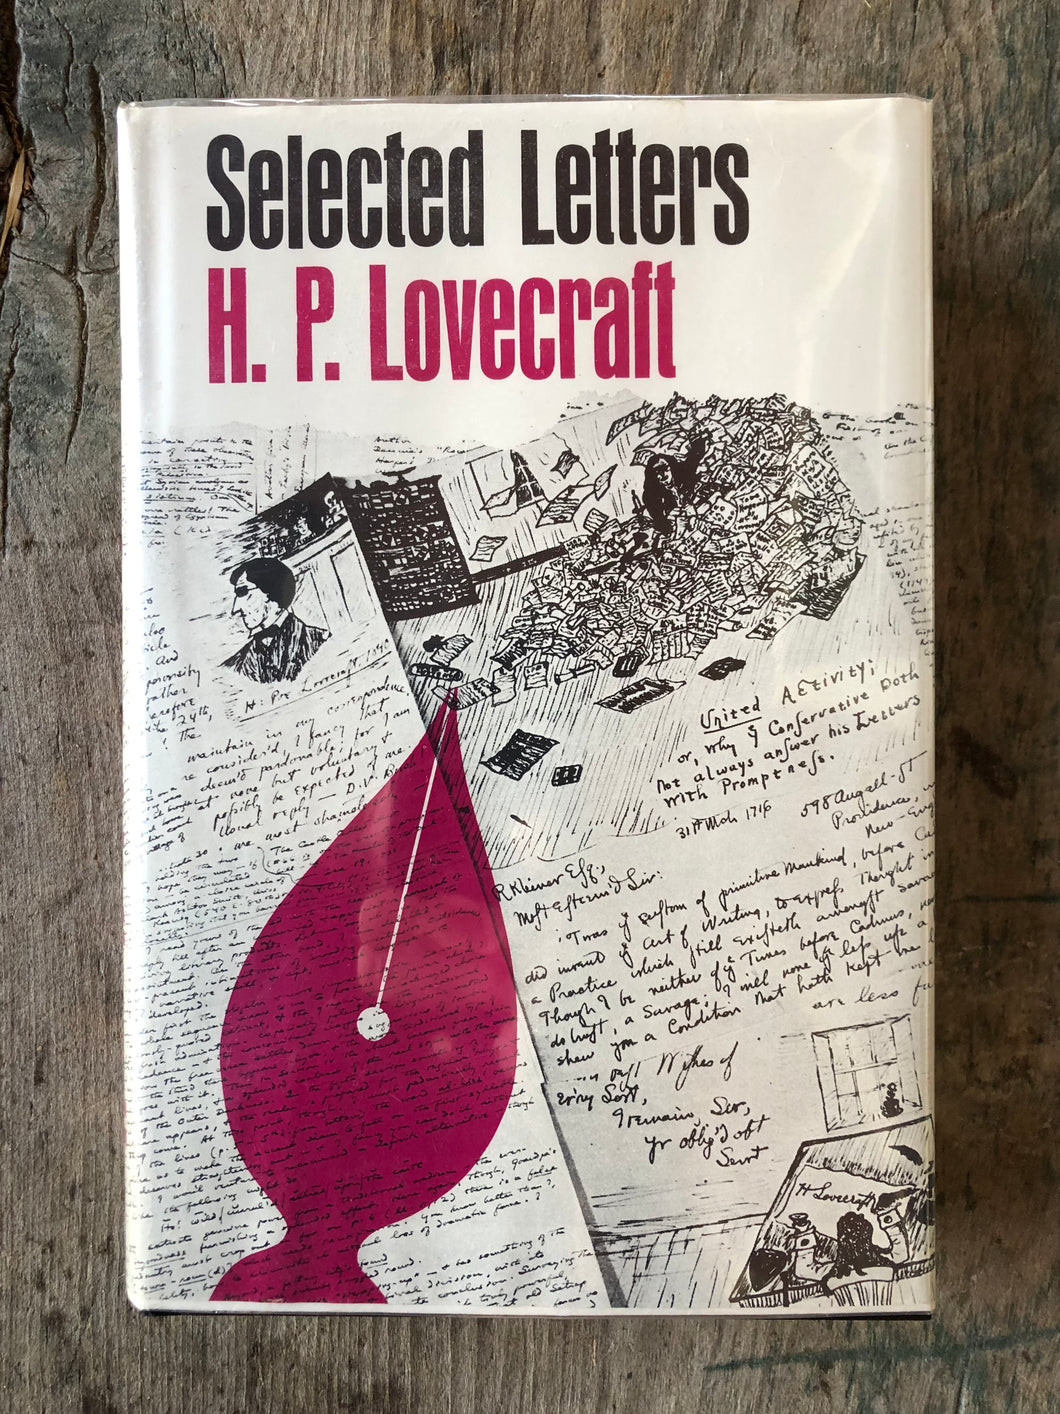 Selected Letters 1925-1929. Volume II. By H. P. Lovecraft and edited by August Derleth and Donald Wandrel